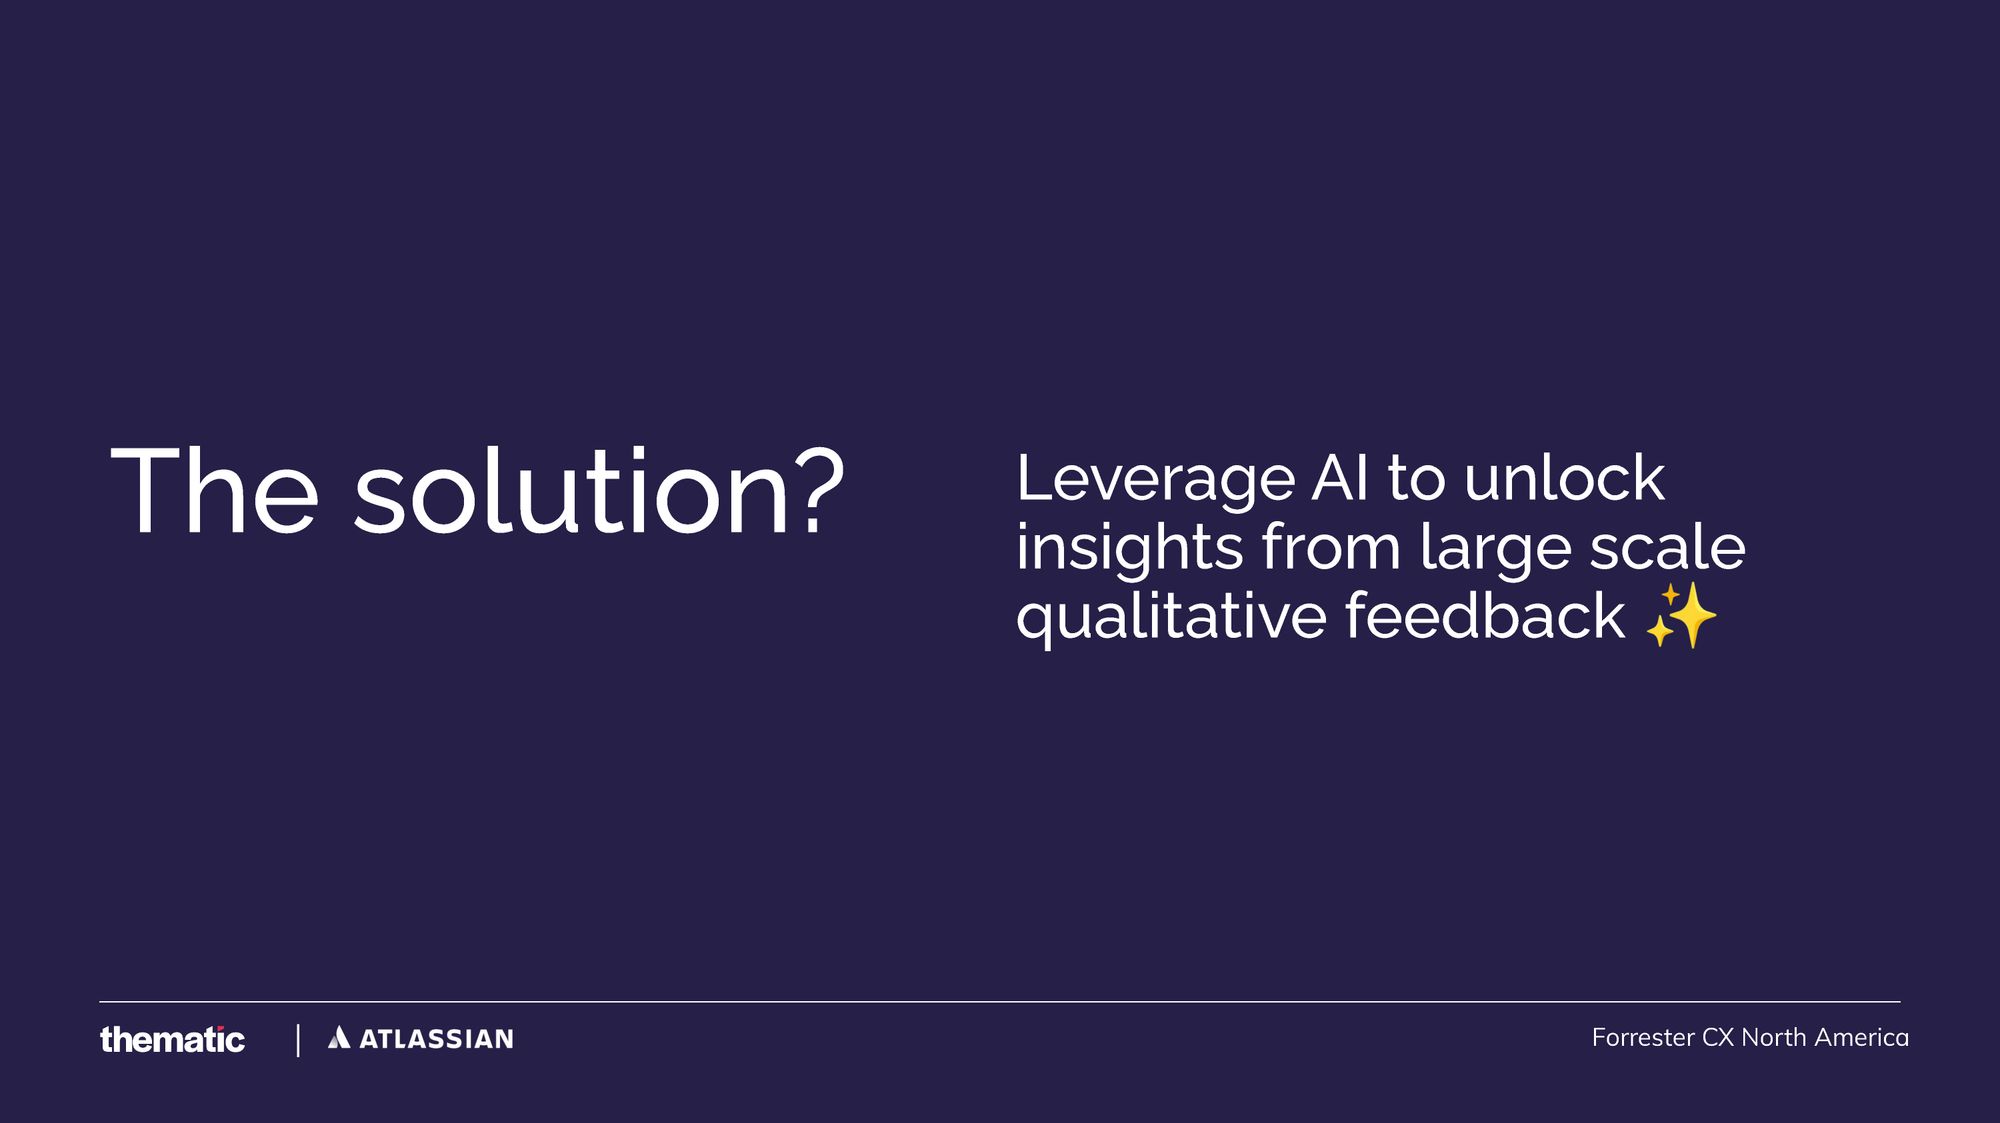 Leverage AI to unlock insights at scale